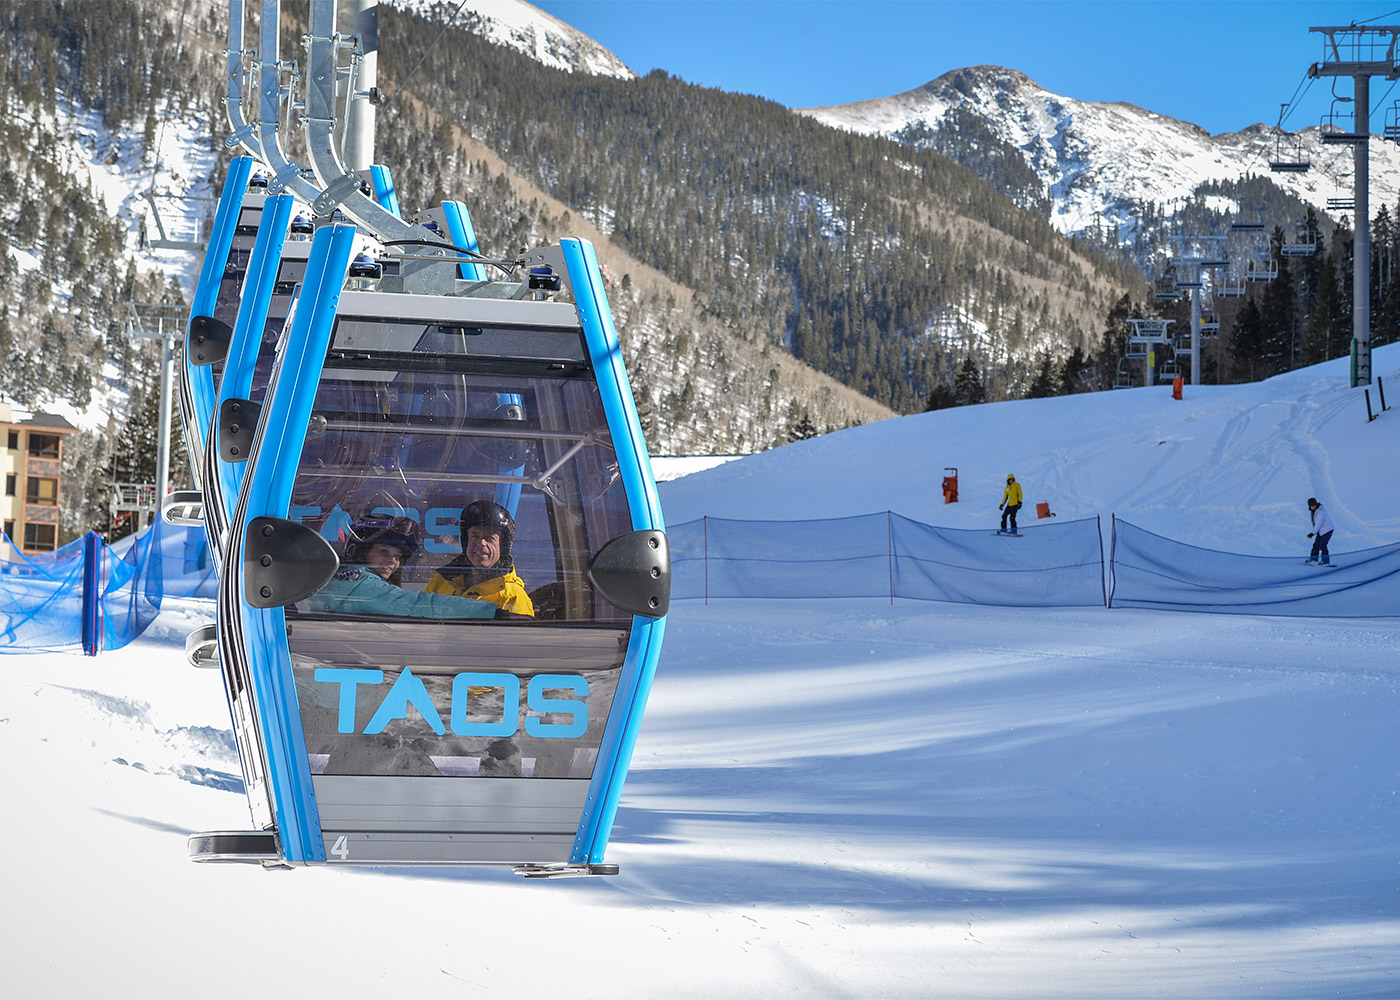 How This Ski Resort Is Driving Positive Impact And Change In The Outdoor Recreation Industry